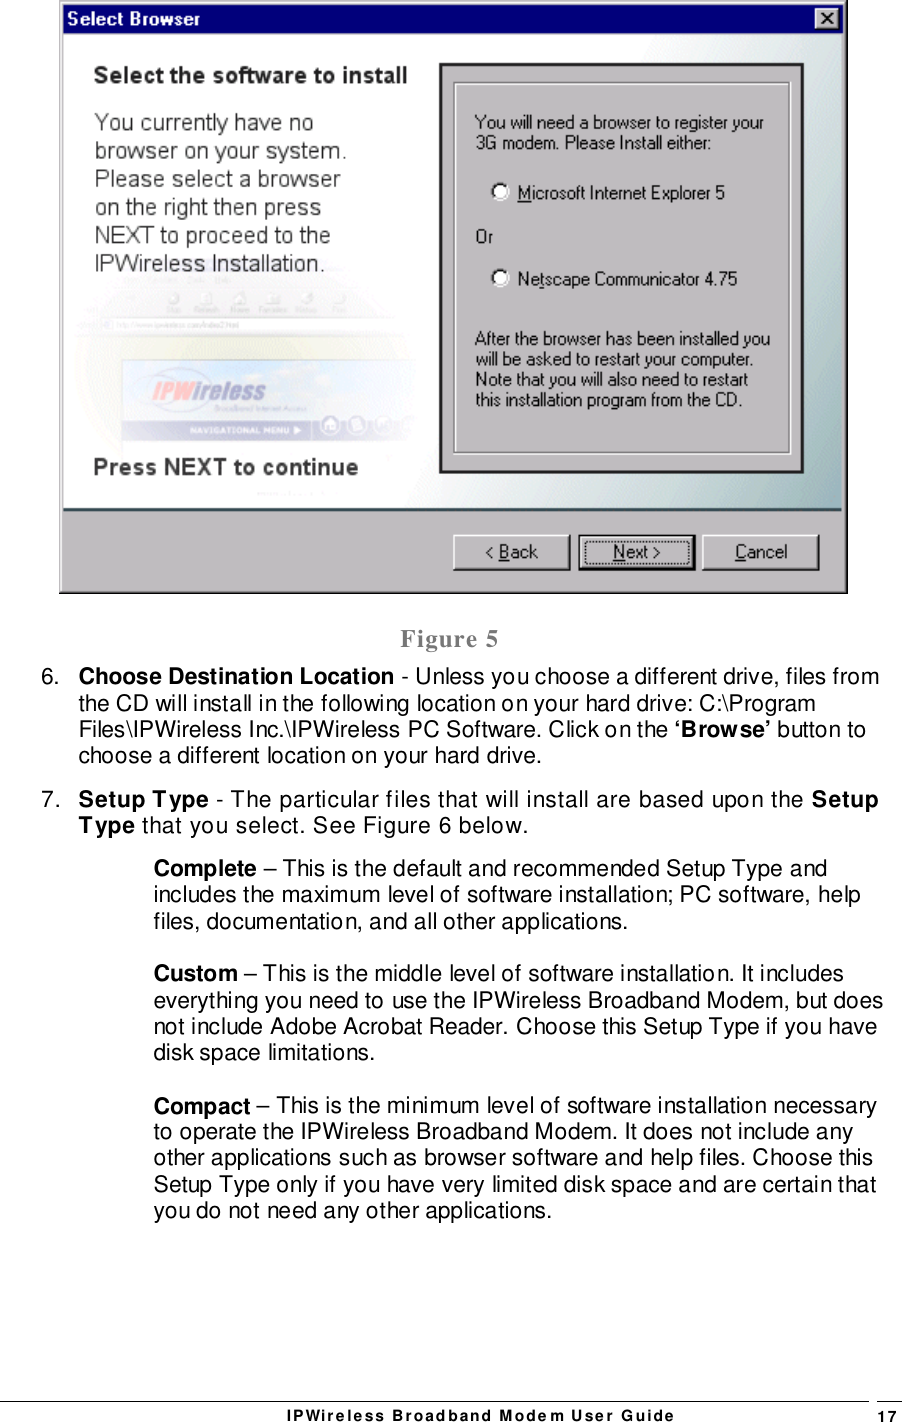 IPWireless Broadband Modem User Guide 17Figure 56.  Choose Destination Location - Unless you choose a different drive, files fromthe CD will install in the following location on your hard drive: C:\ProgramFiles\IPWireless Inc.\IPWireless PC Software. Click on the ‘Browse’ button tochoose a different location on your hard drive.7.  Setup Type - The particular files that will install are based upon the SetupType that you select. See Figure 6 below.Complete – This is the default and recommended Setup Type andincludes the maximum level of software installation; PC software, helpfiles, documentation, and all other applications.Custom – This is the middle level of software installation. It includeseverything you need to use the IPWireless Broadband Modem, but doesnot include Adobe Acrobat Reader. Choose this Setup Type if you havedisk space limitations.Compact – This is the minimum level of software installation necessaryto operate the IPWireless Broadband Modem. It does not include anyother applications such as browser software and help files. Choose thisSetup Type only if you have very limited disk space and are certain thatyou do not need any other applications.